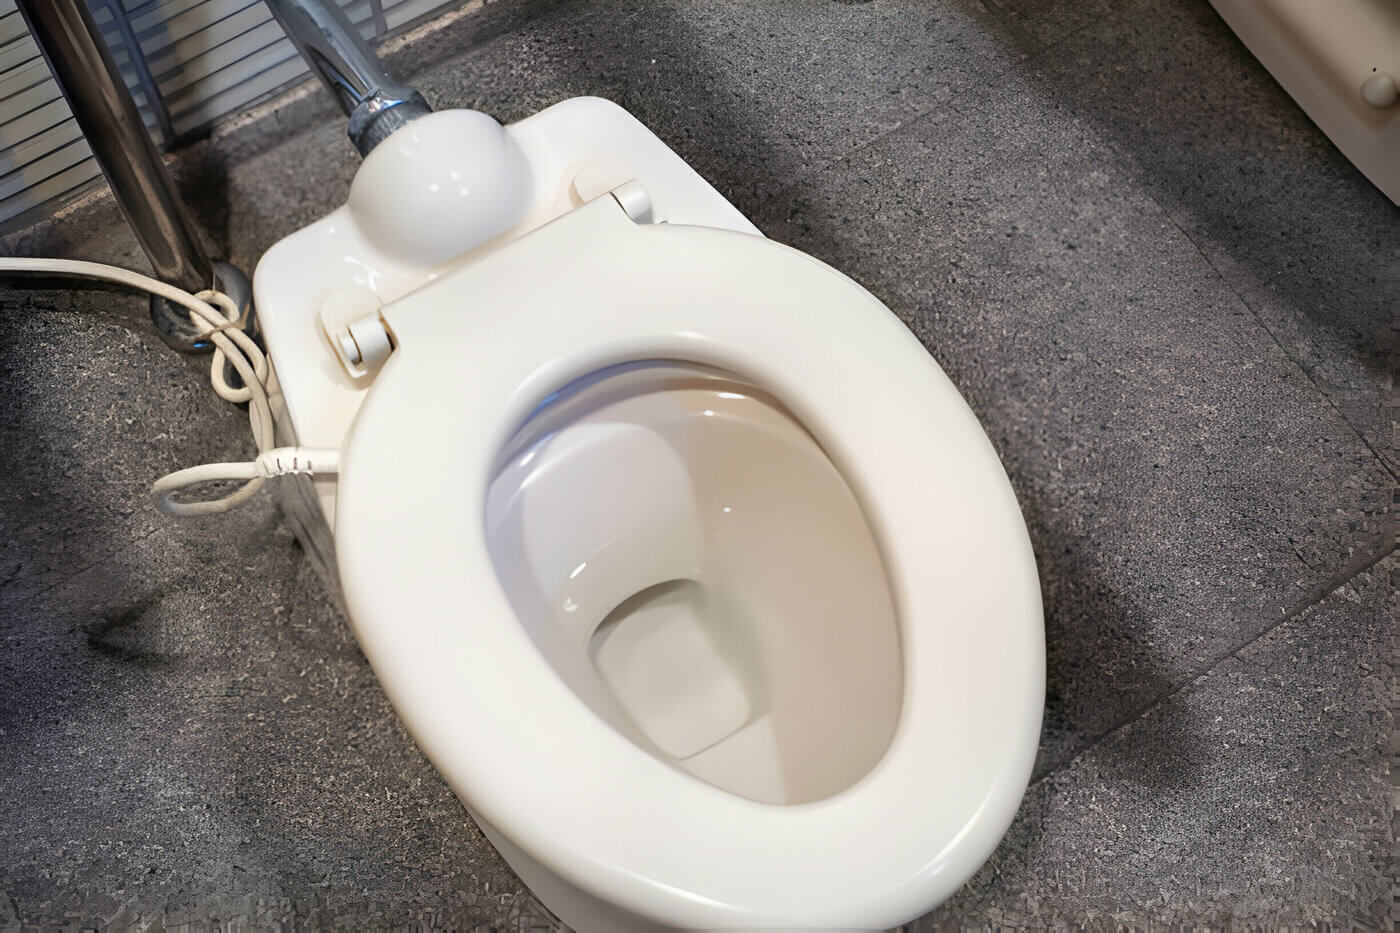 electric cord to the toilet seat for heating